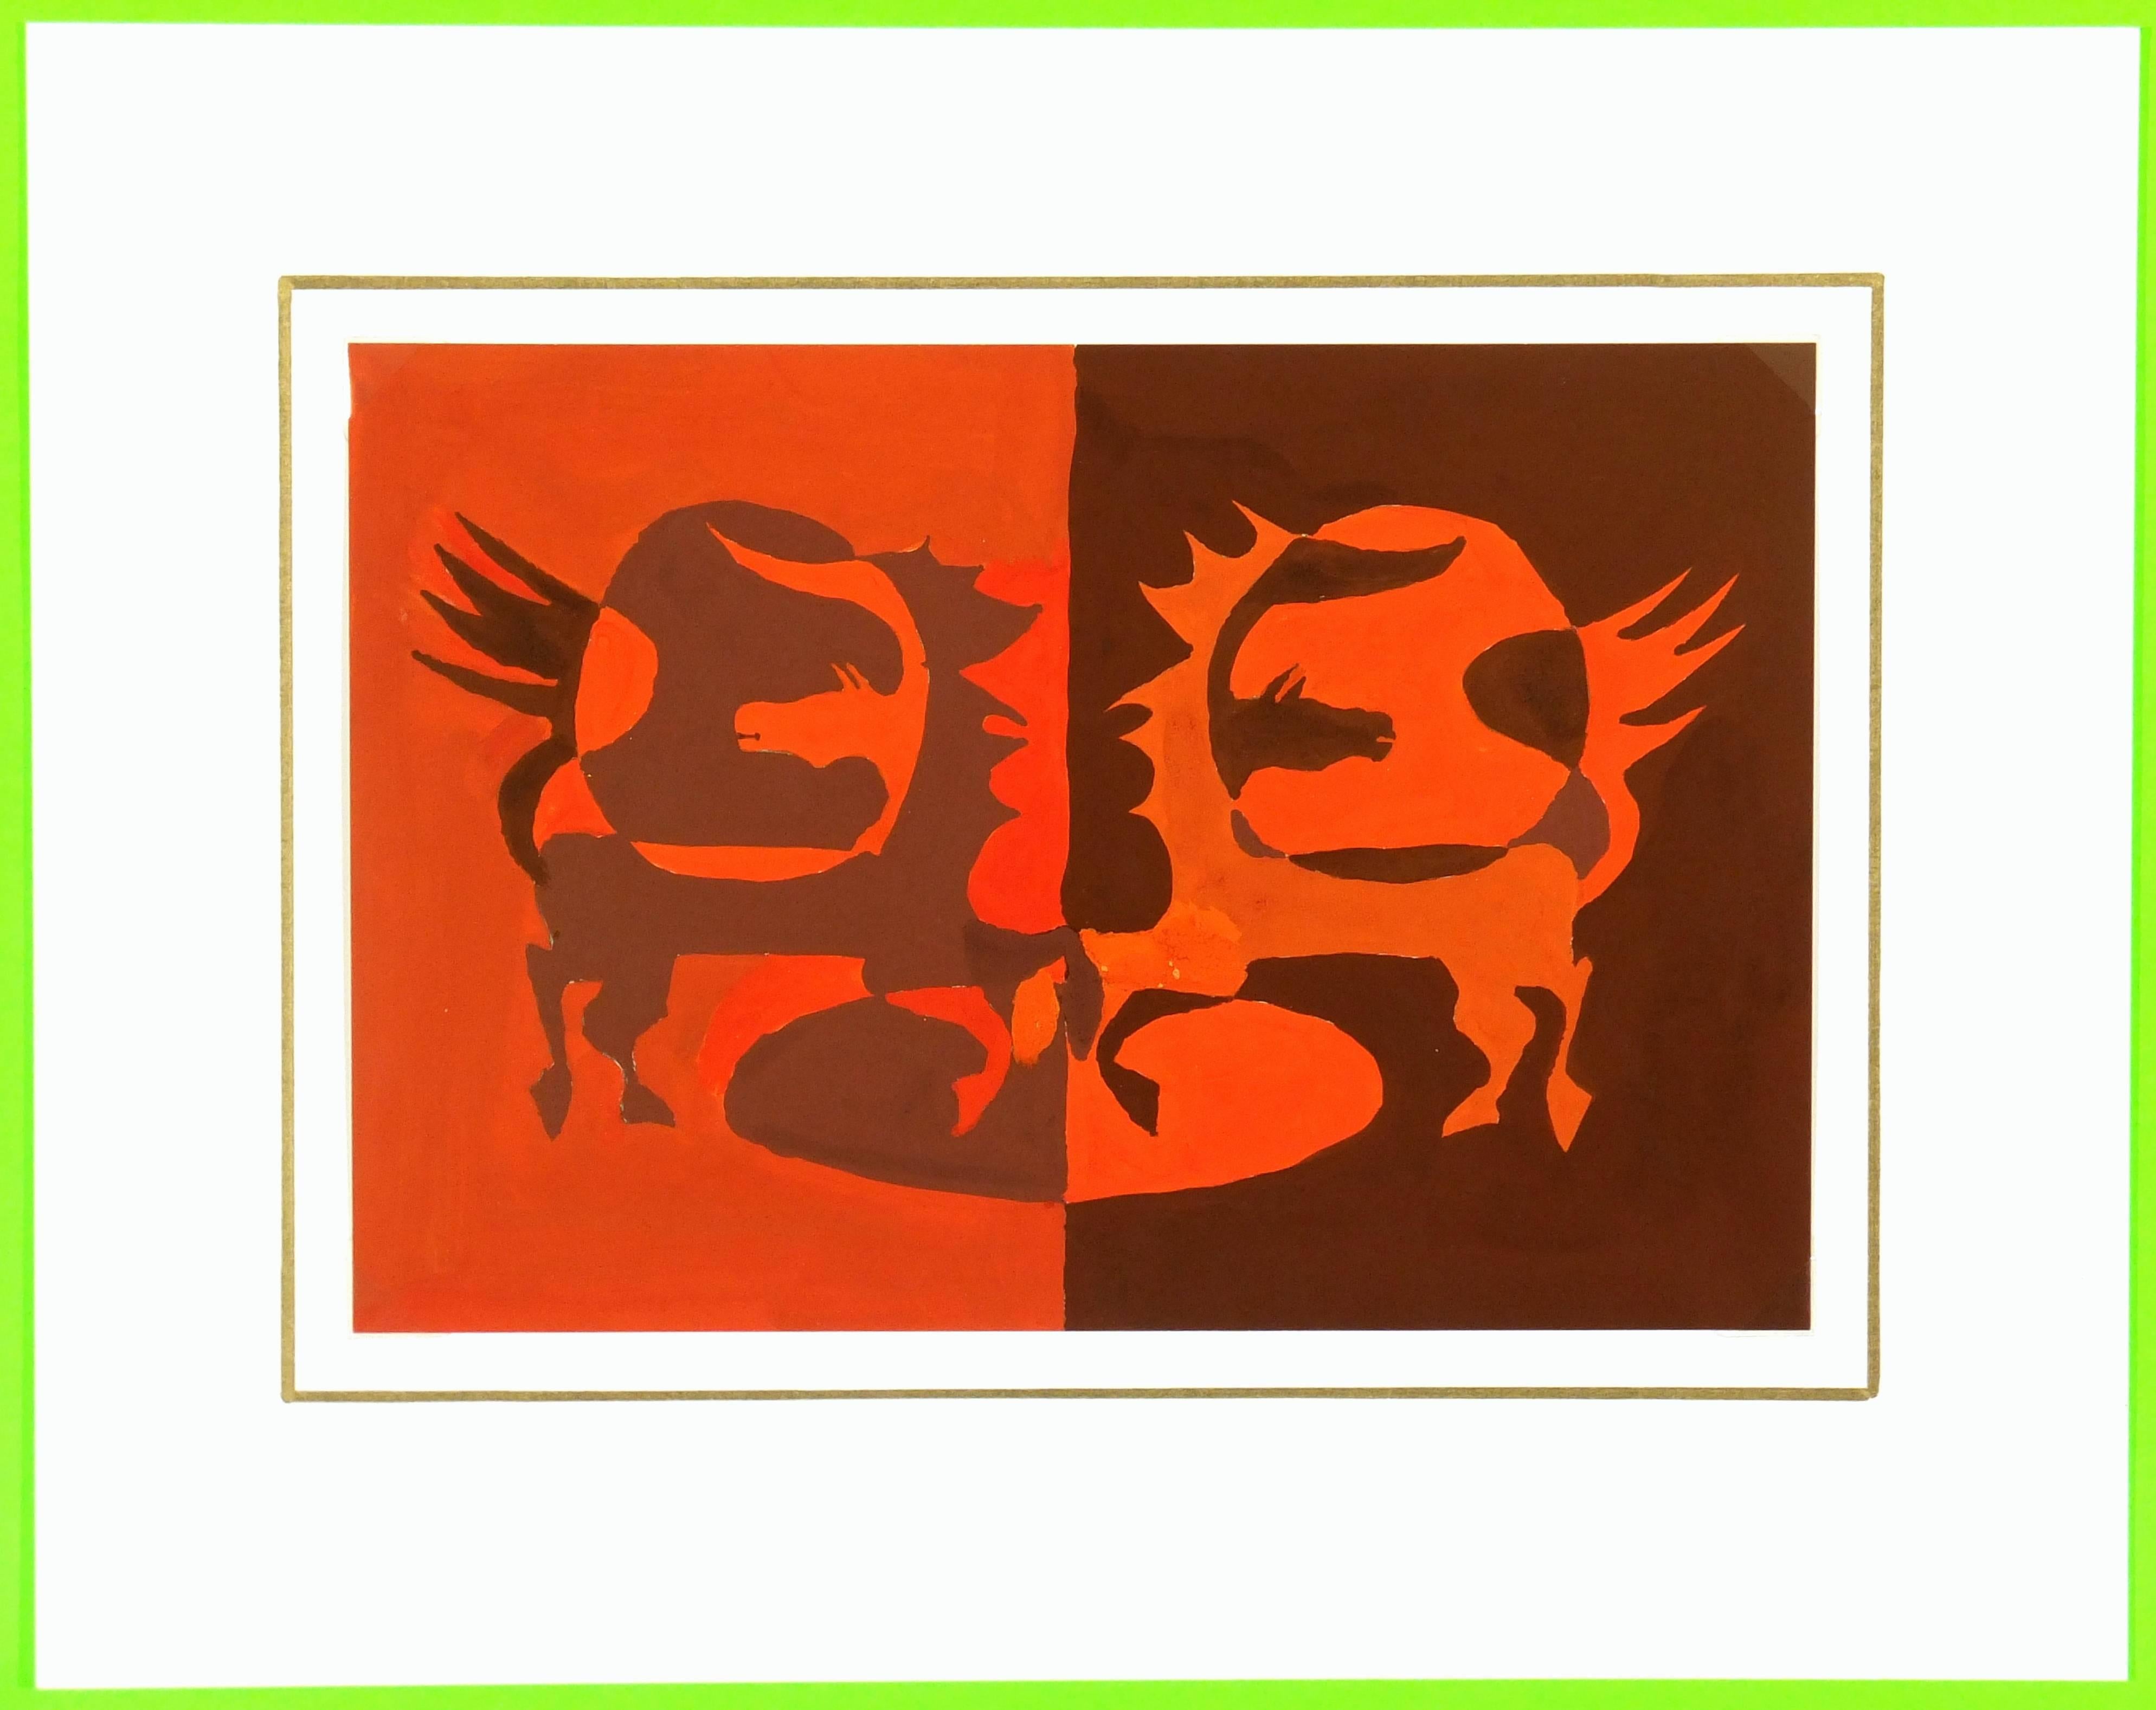 Abstract painting of pair of stallions with crested manes in tones of orange, circa 1960.   

Original artwork on paper displayed on a white mat with a gold border. Mat fits a standard-size frame.  Archival plastic sleeve and Certificate of